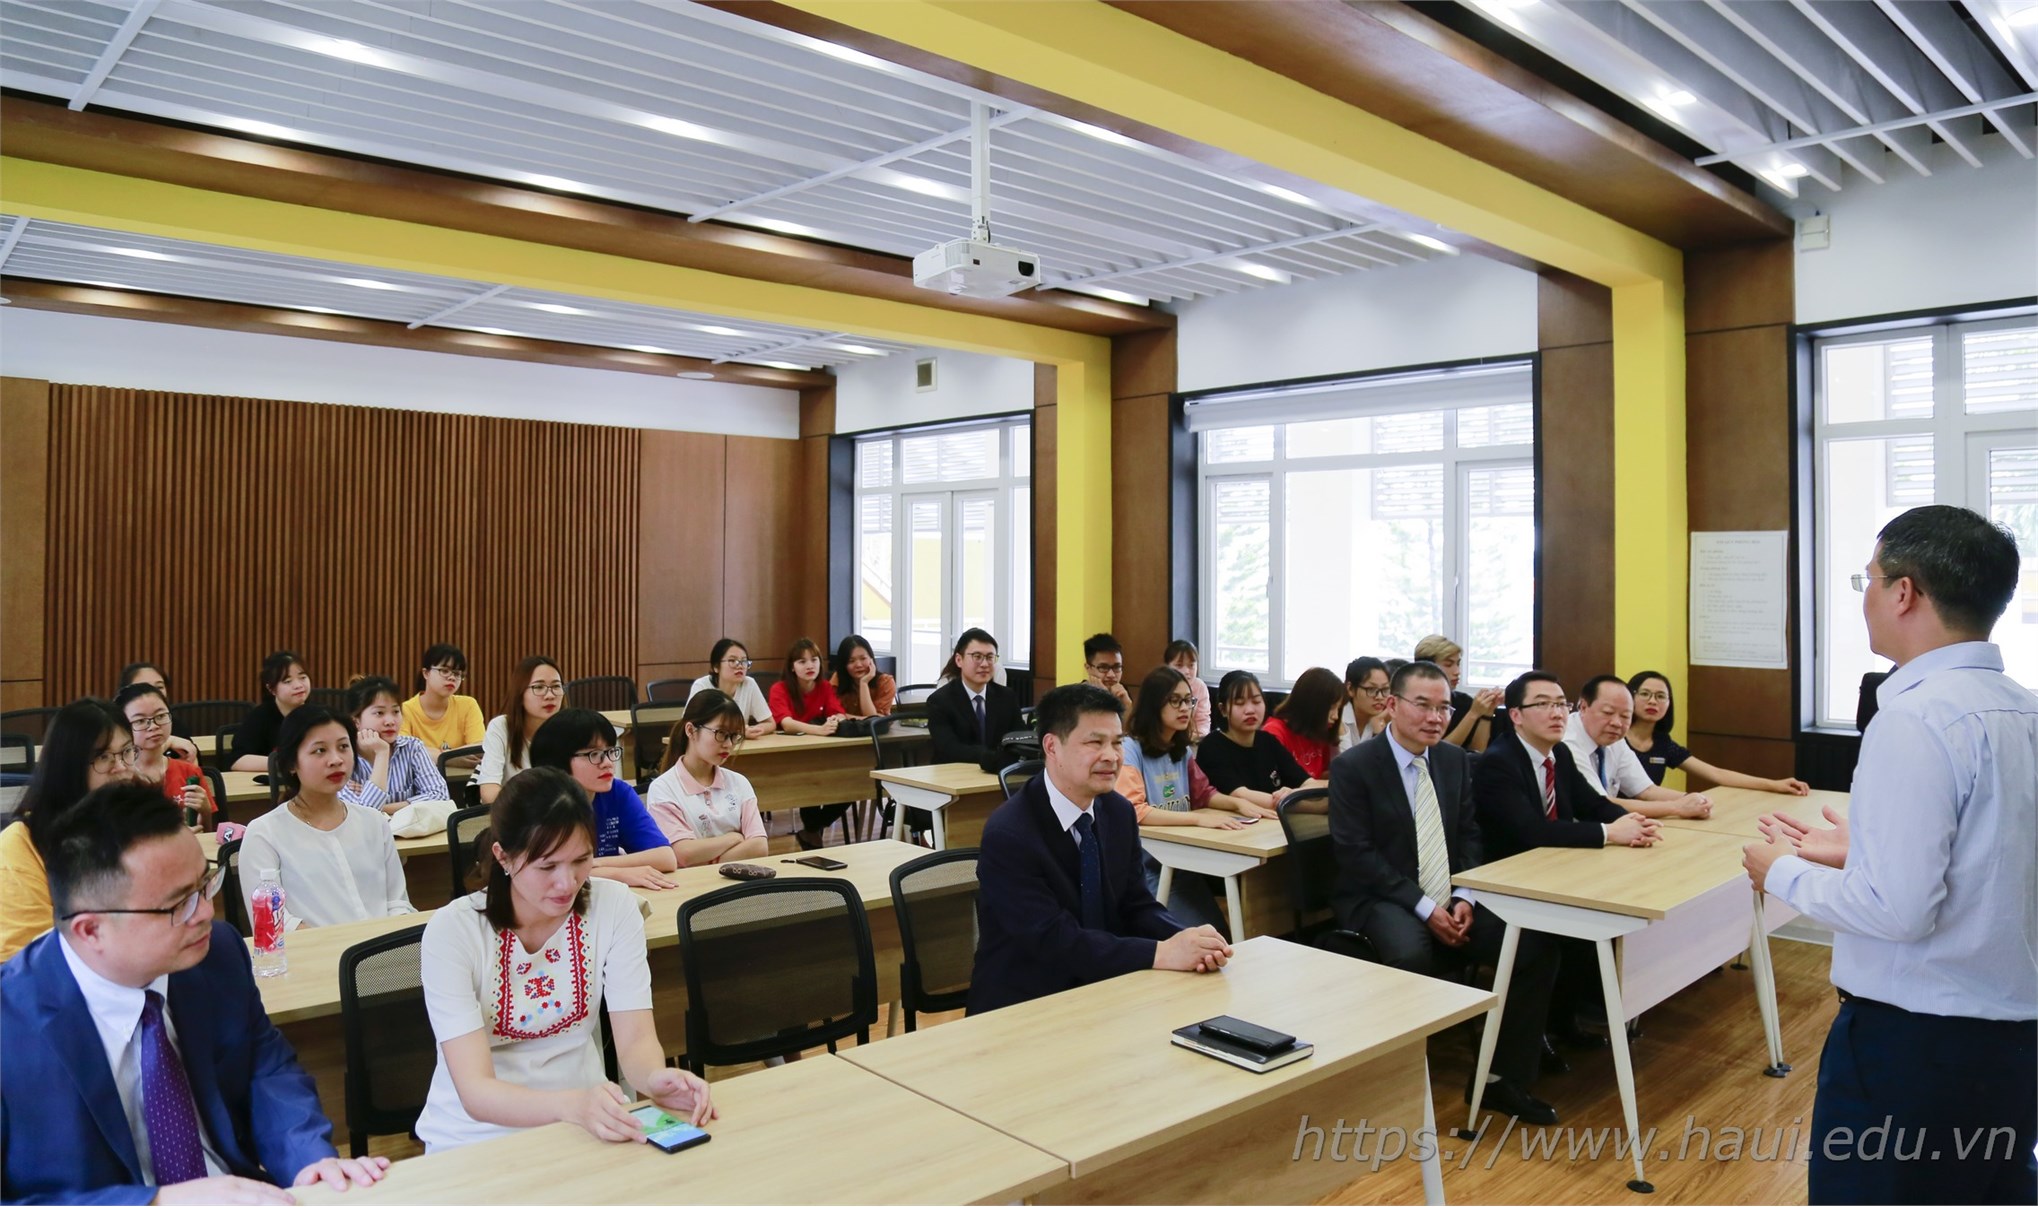 Guangxi University of Science and Technology, China paid a working visit to Hanoi University of Industry